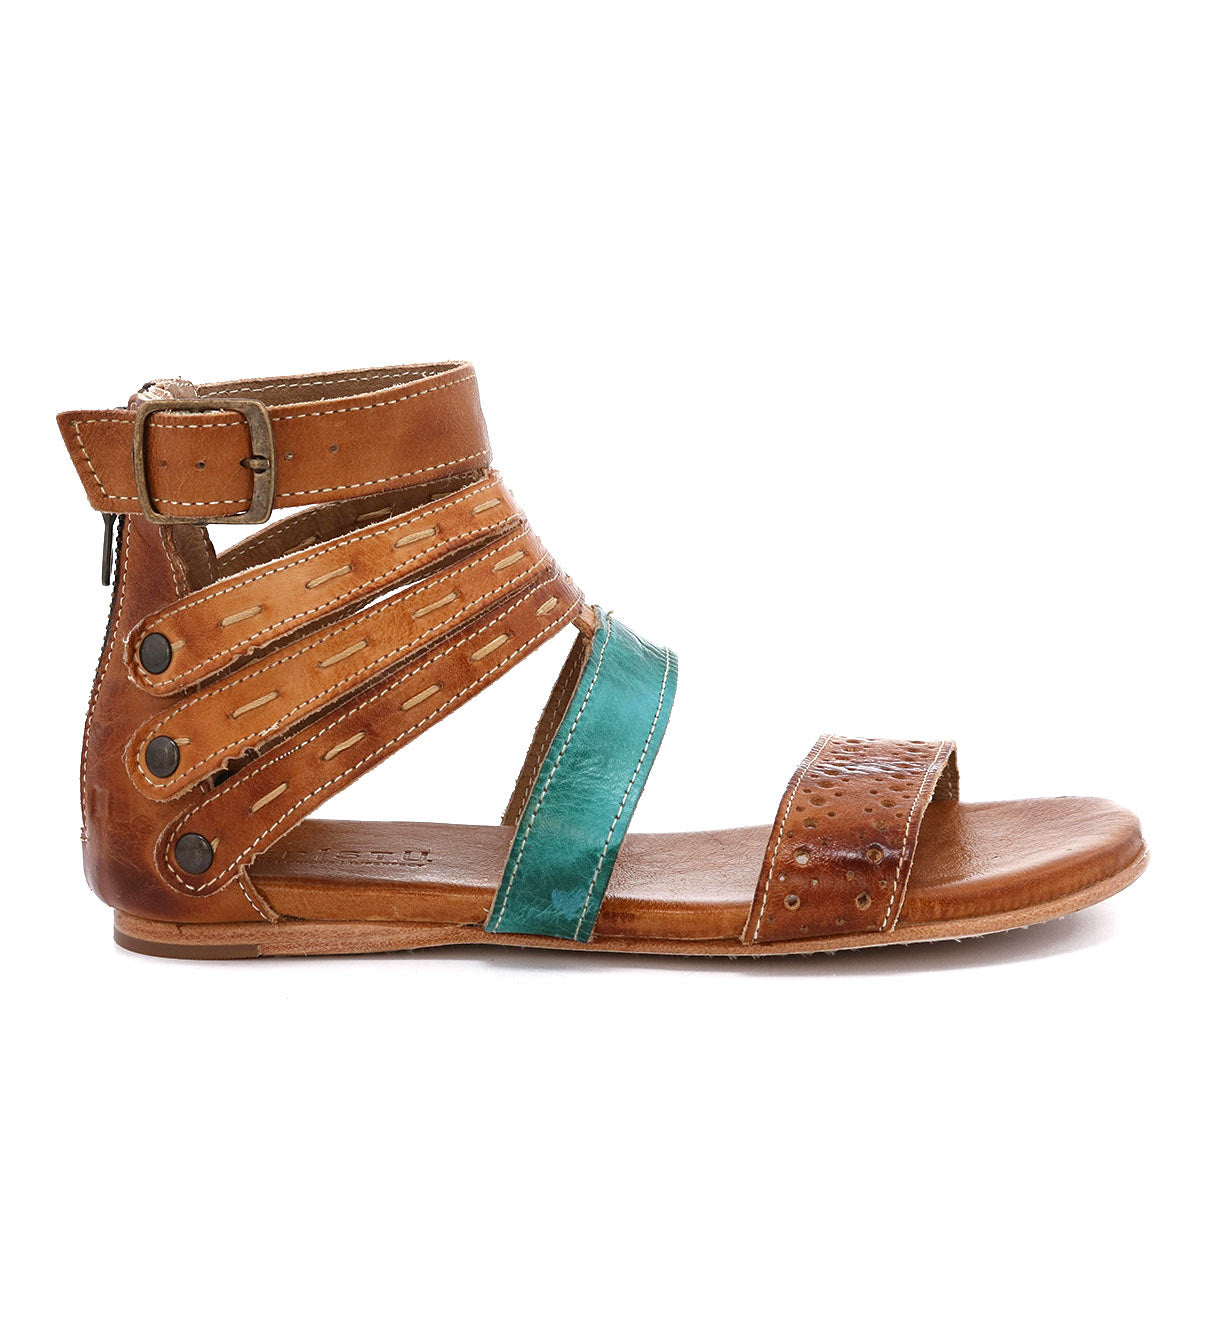 An Artemis sandal by Bed Stu with tan and turquoise straps.